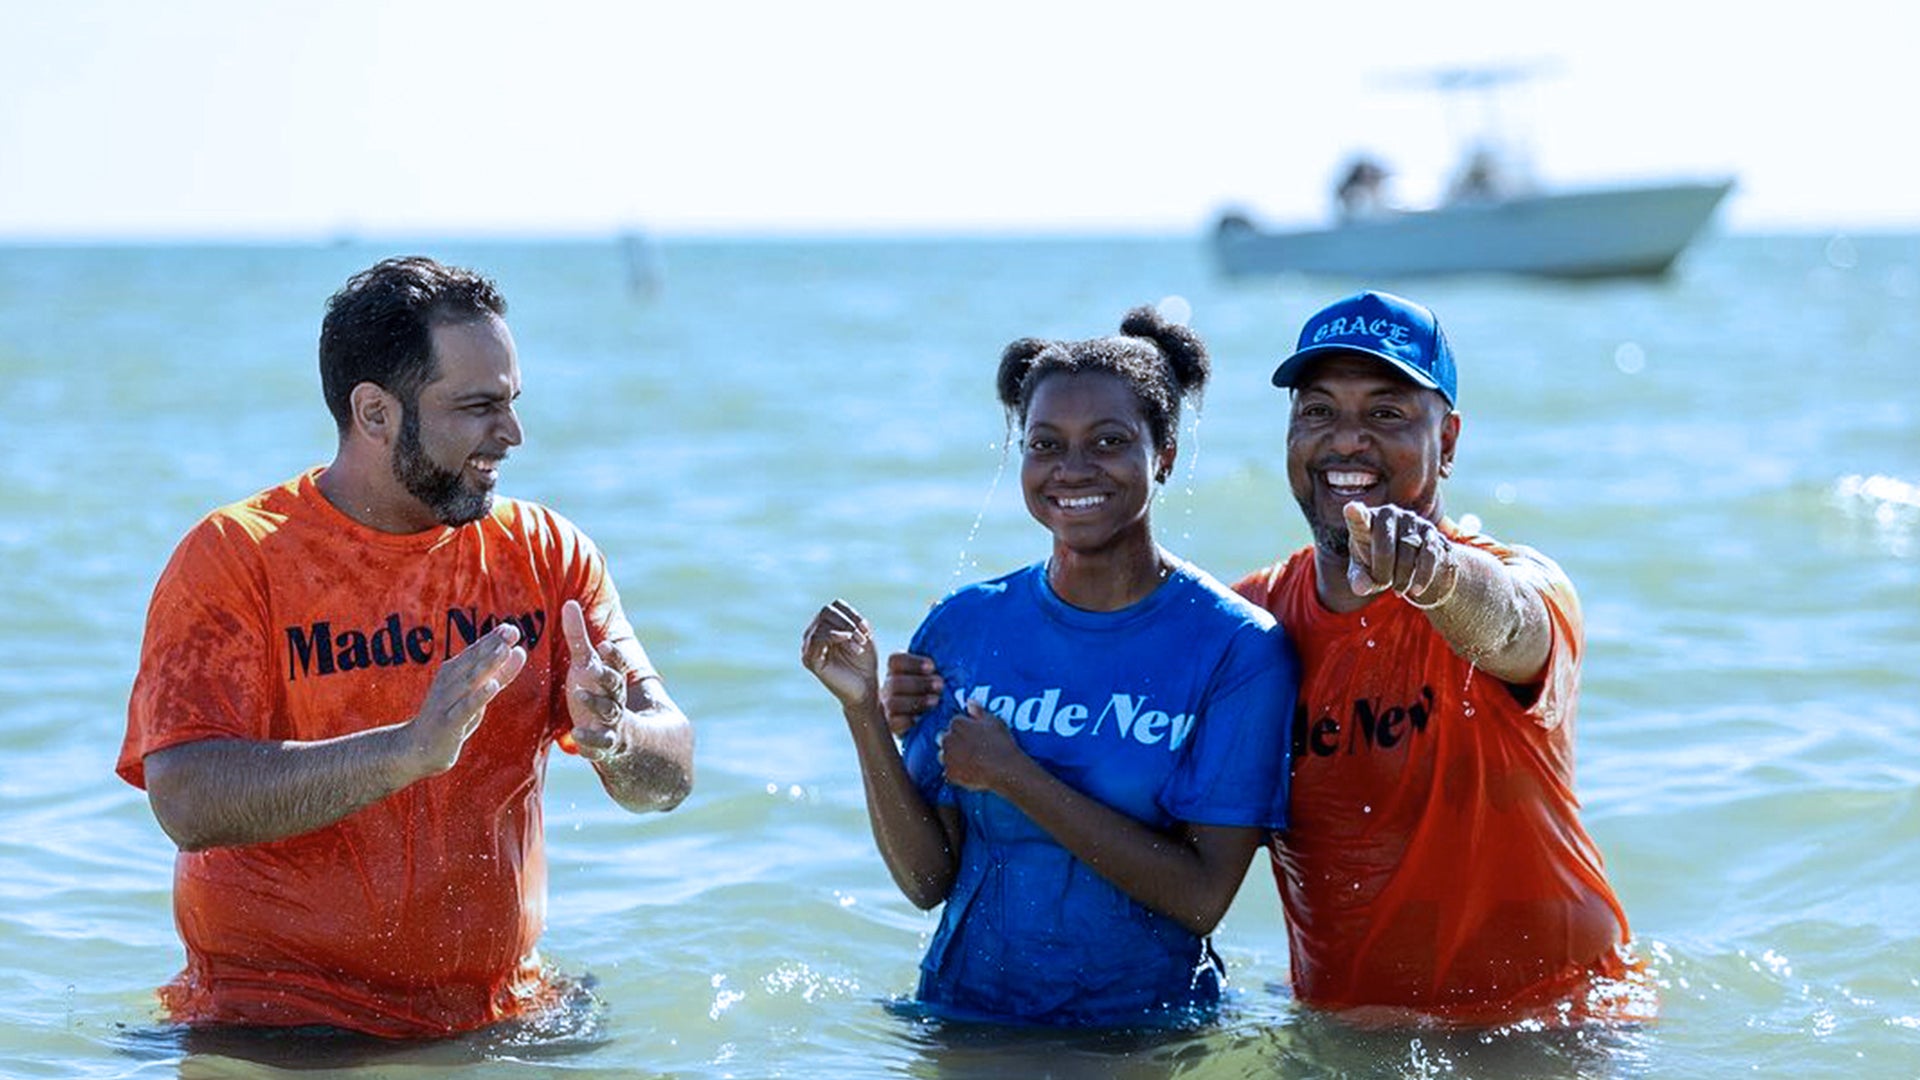   
																Tampa Church Baptizes Nearly 1,000 People On the Beach: 'There is A Wave of Revival Coming' 
															 